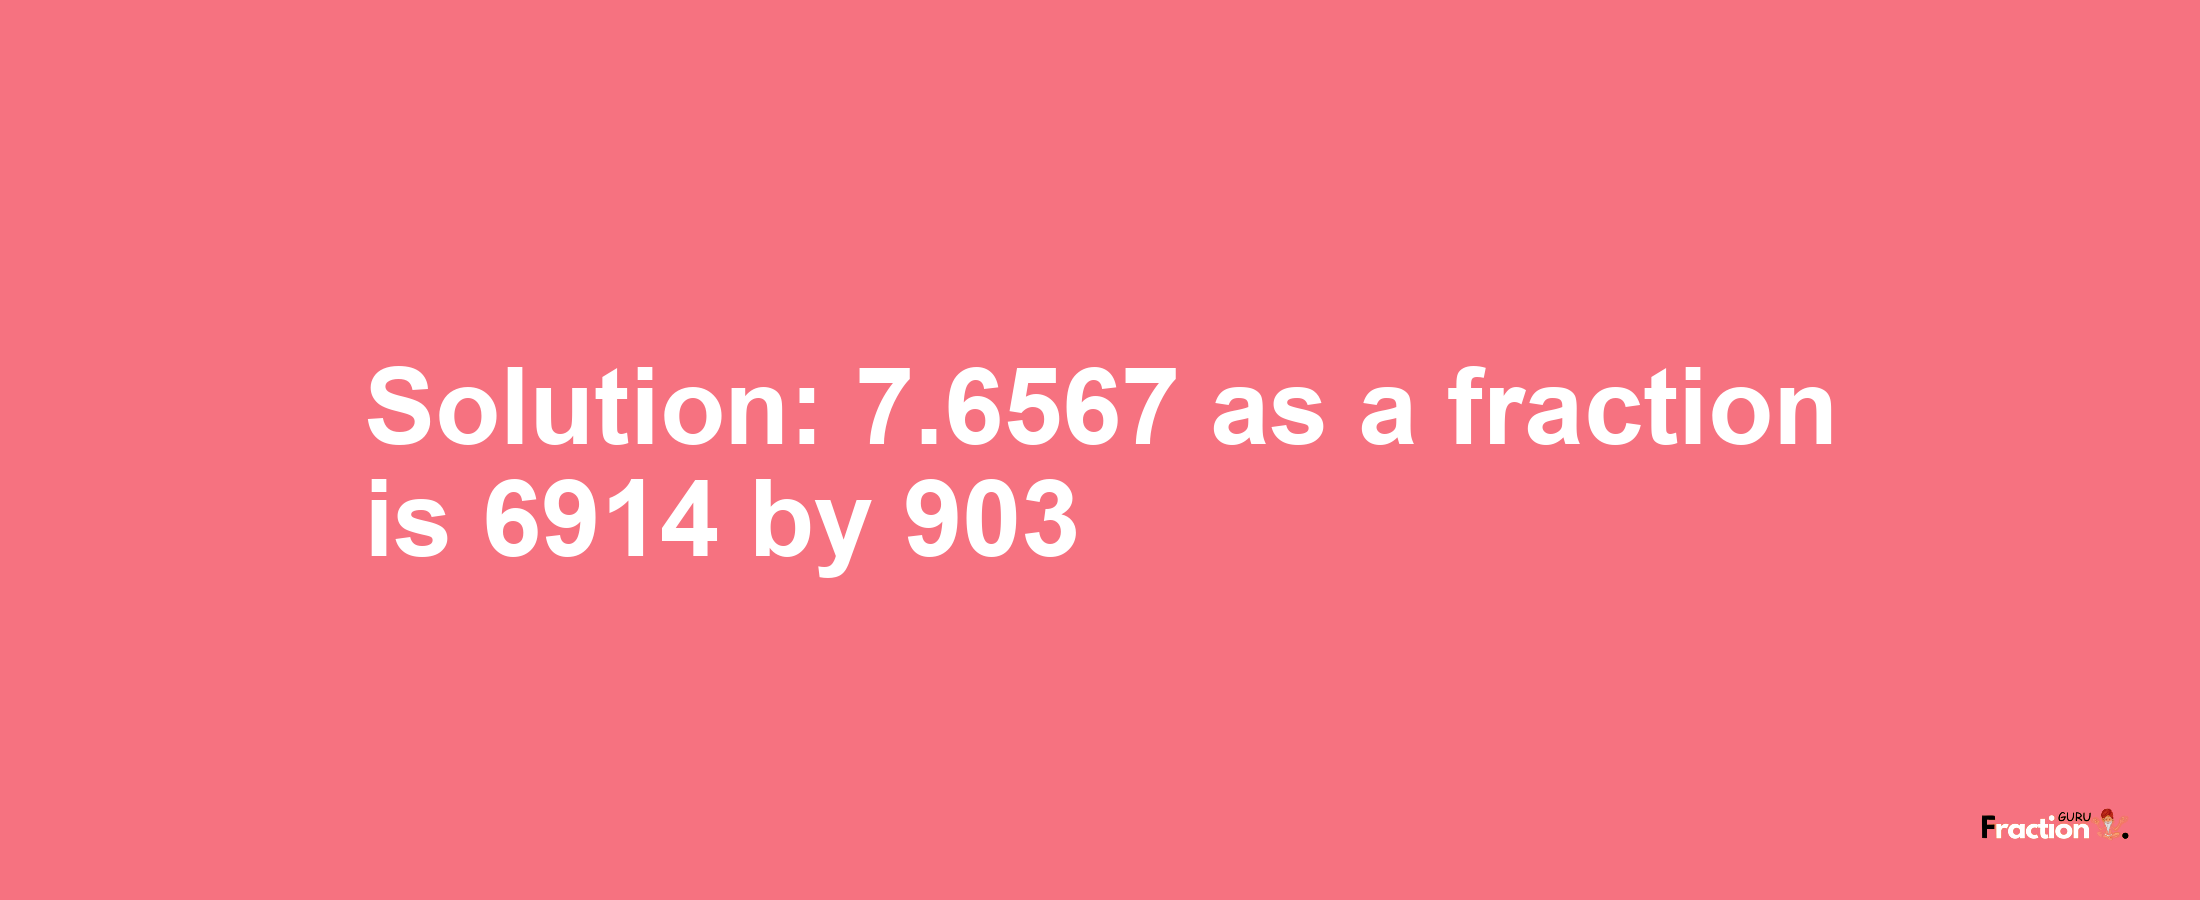 Solution:7.6567 as a fraction is 6914/903